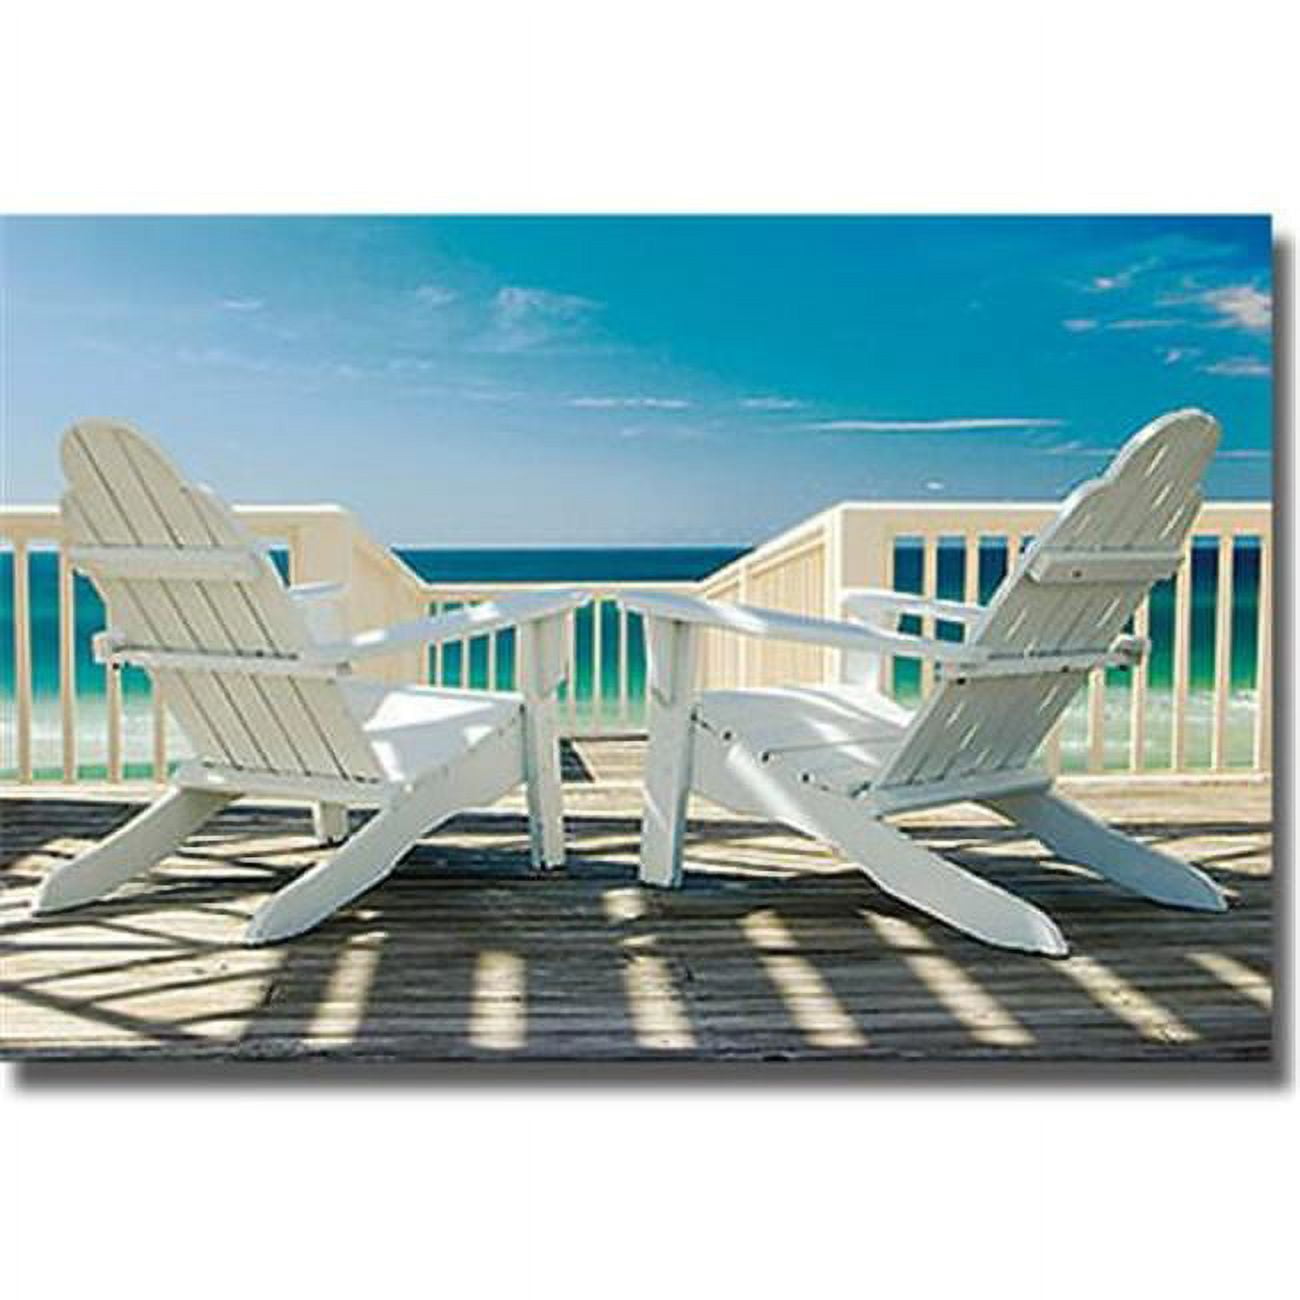 1218am918eg Deck Chairs By Doug Cavanah Premium Gallery Wrapped Canvas Giclee Art - 12 X 18 X 1.5 In.